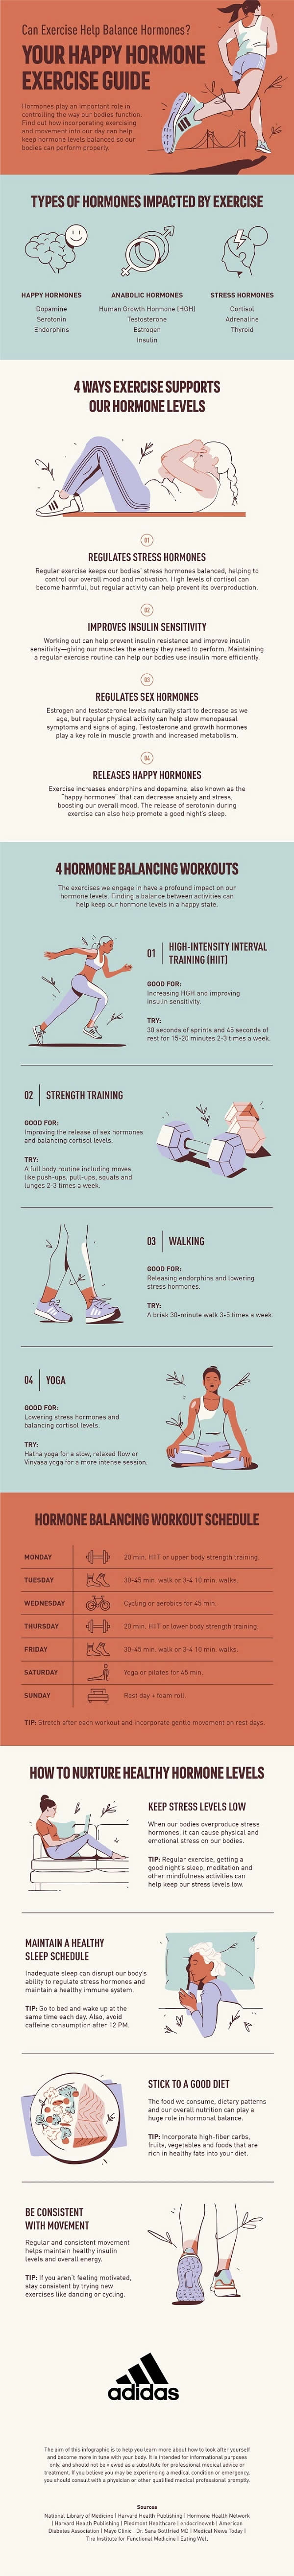 Infographic Can Exercise help Balance Hormones